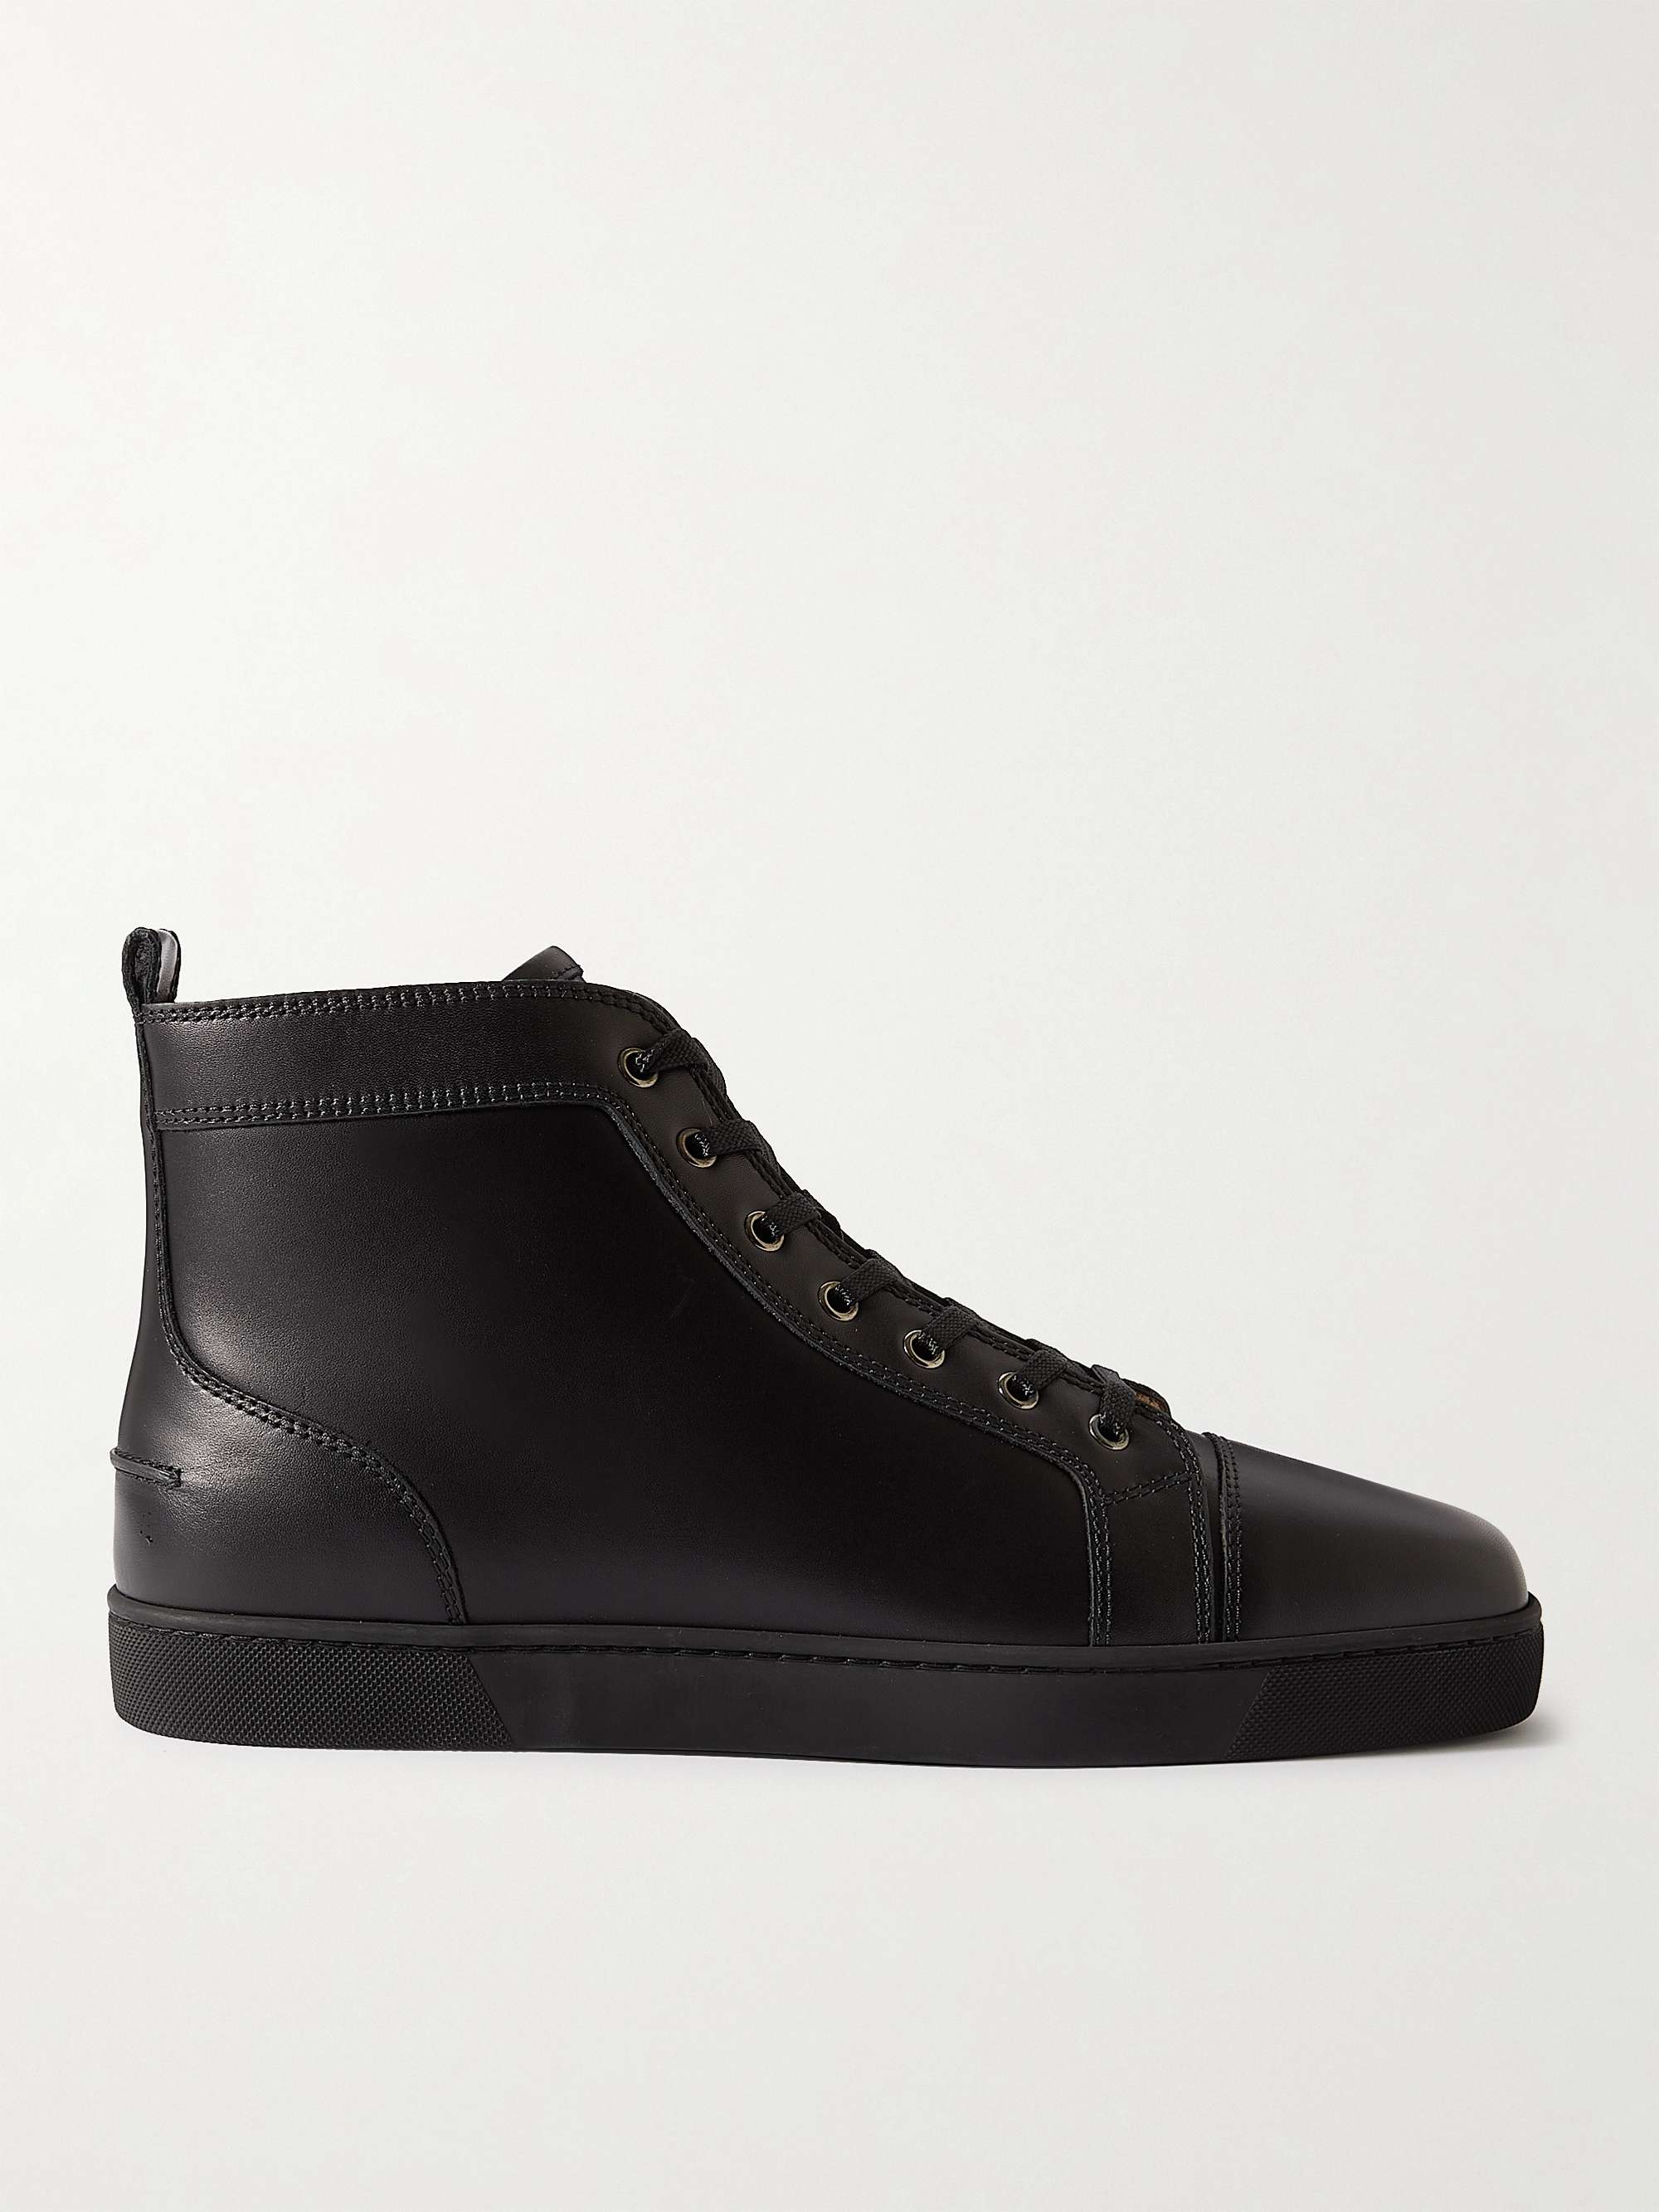 Motherland companion bow Black Louis Leather High-Top Sneakers | CHRISTIAN LOUBOUTIN | MR PORTER